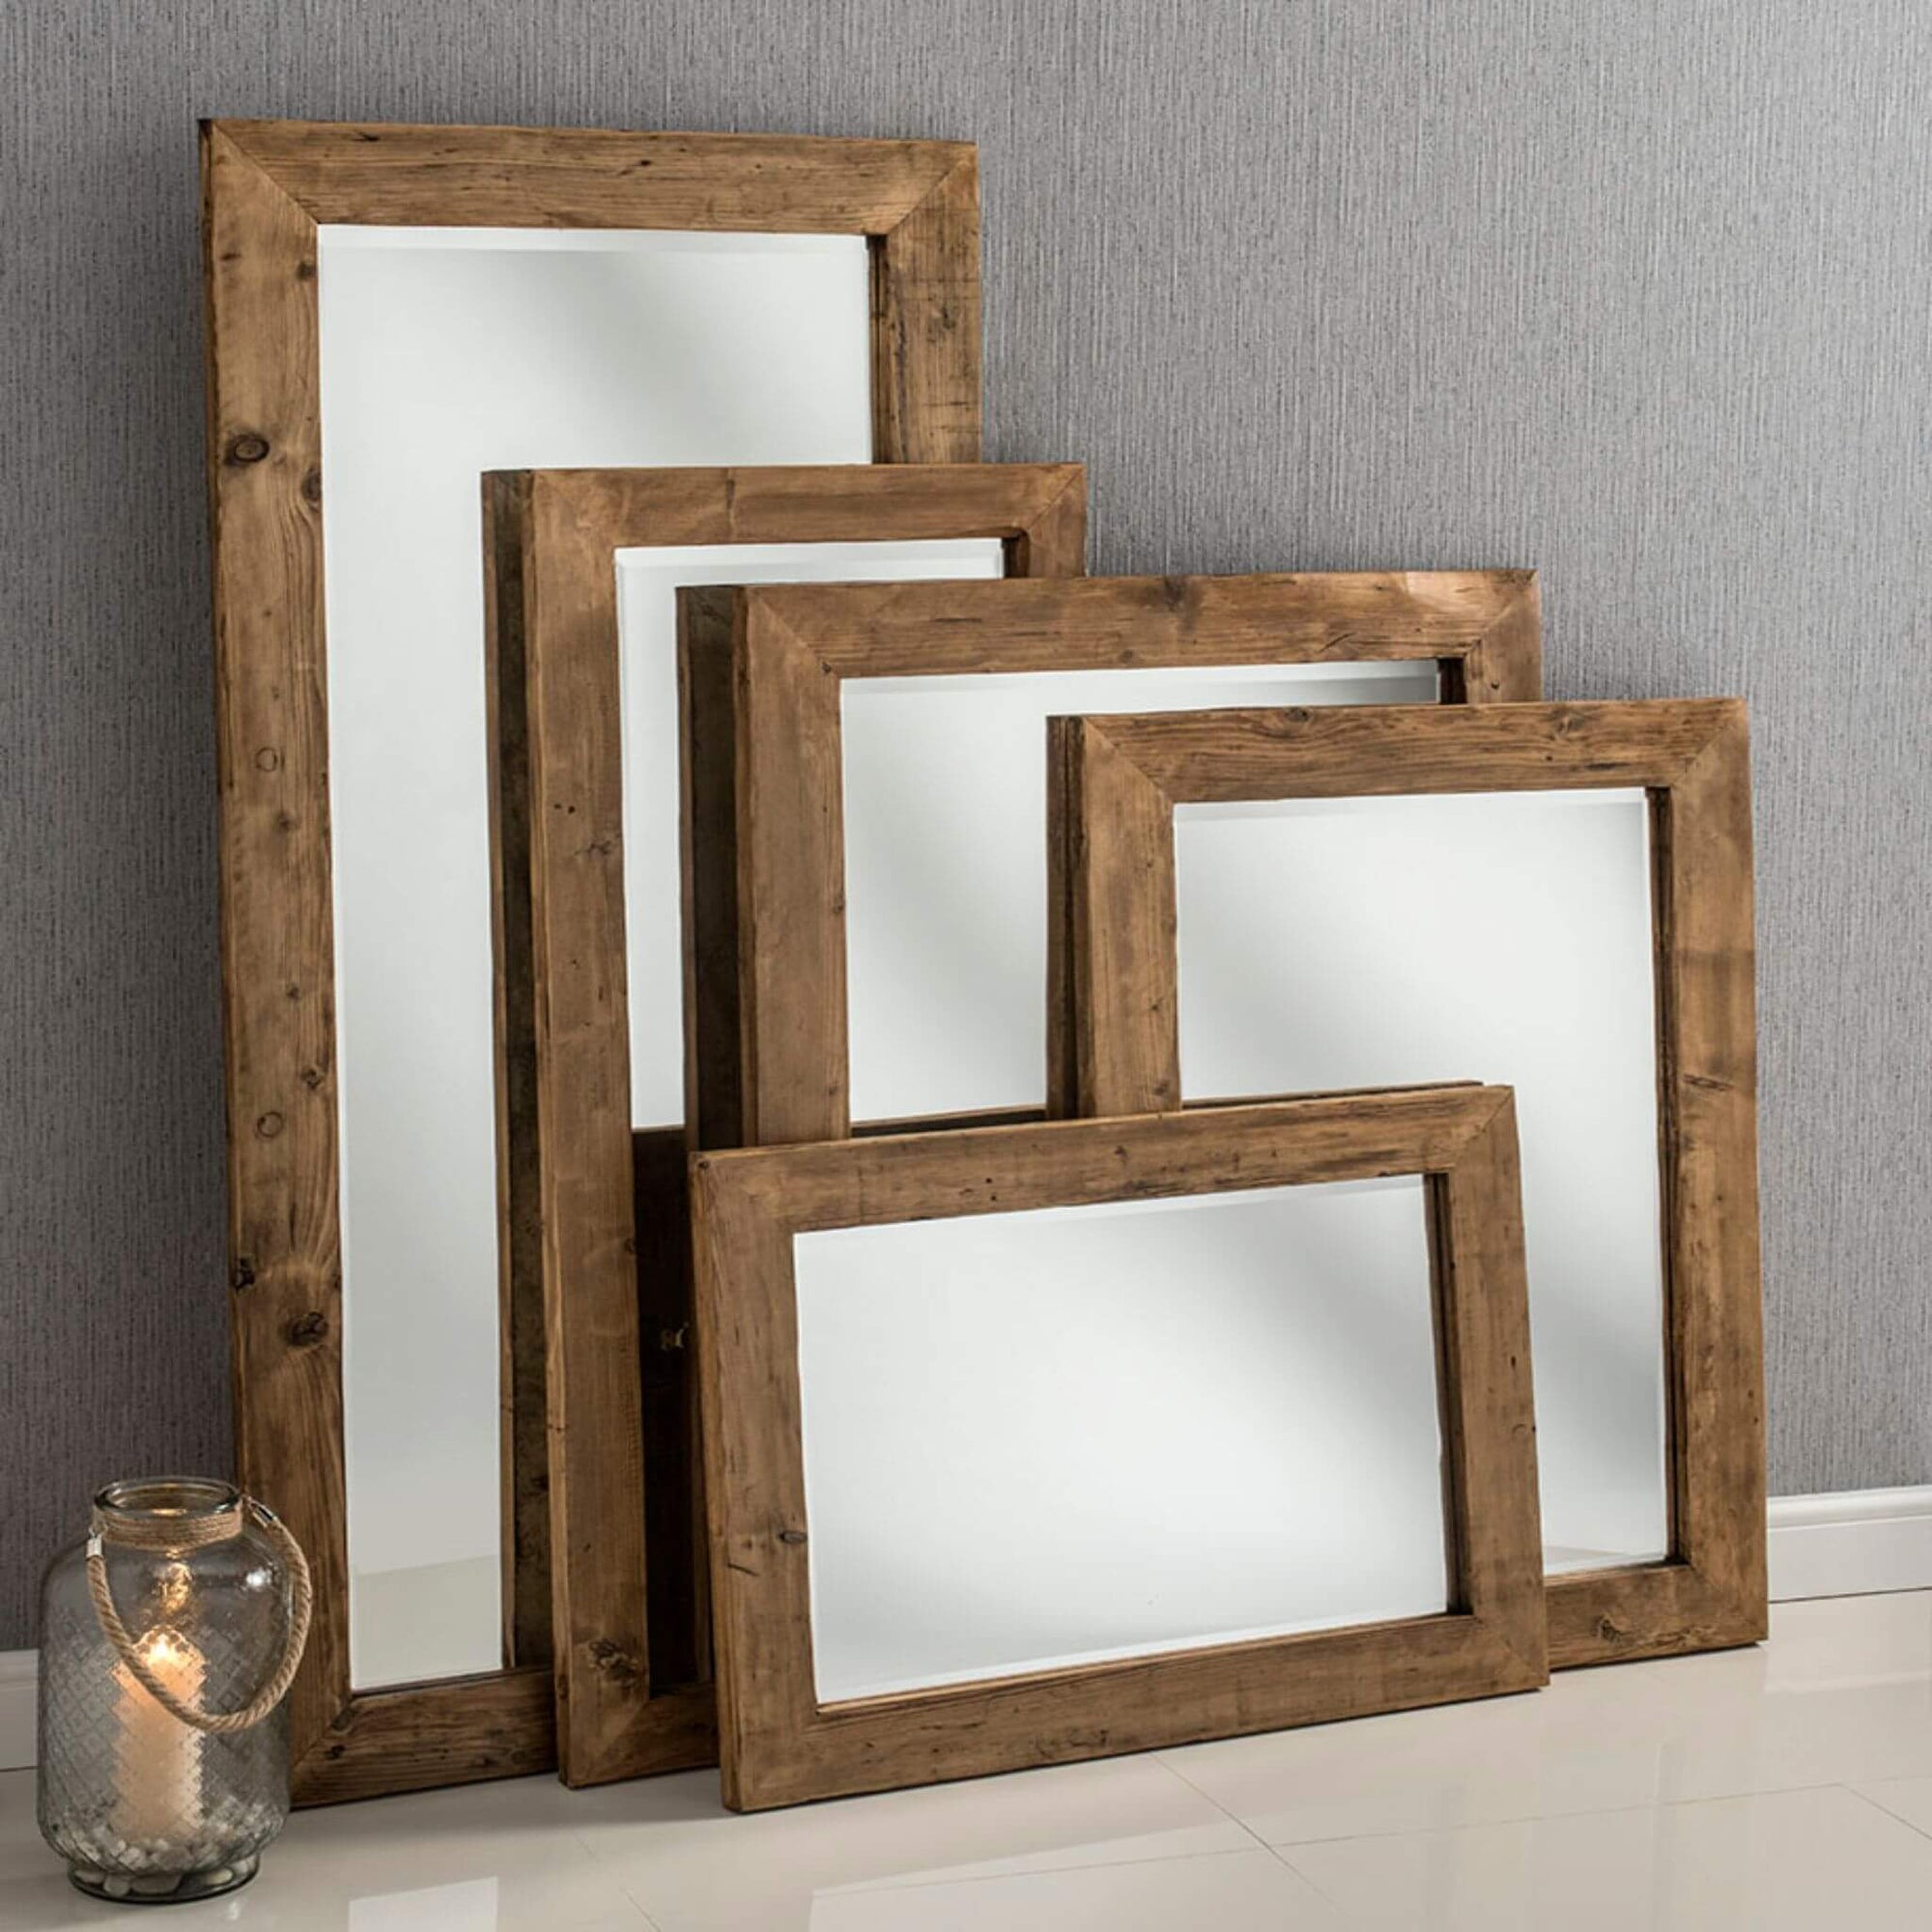 The Yenisei Solid Reclaimed Wood Mirror